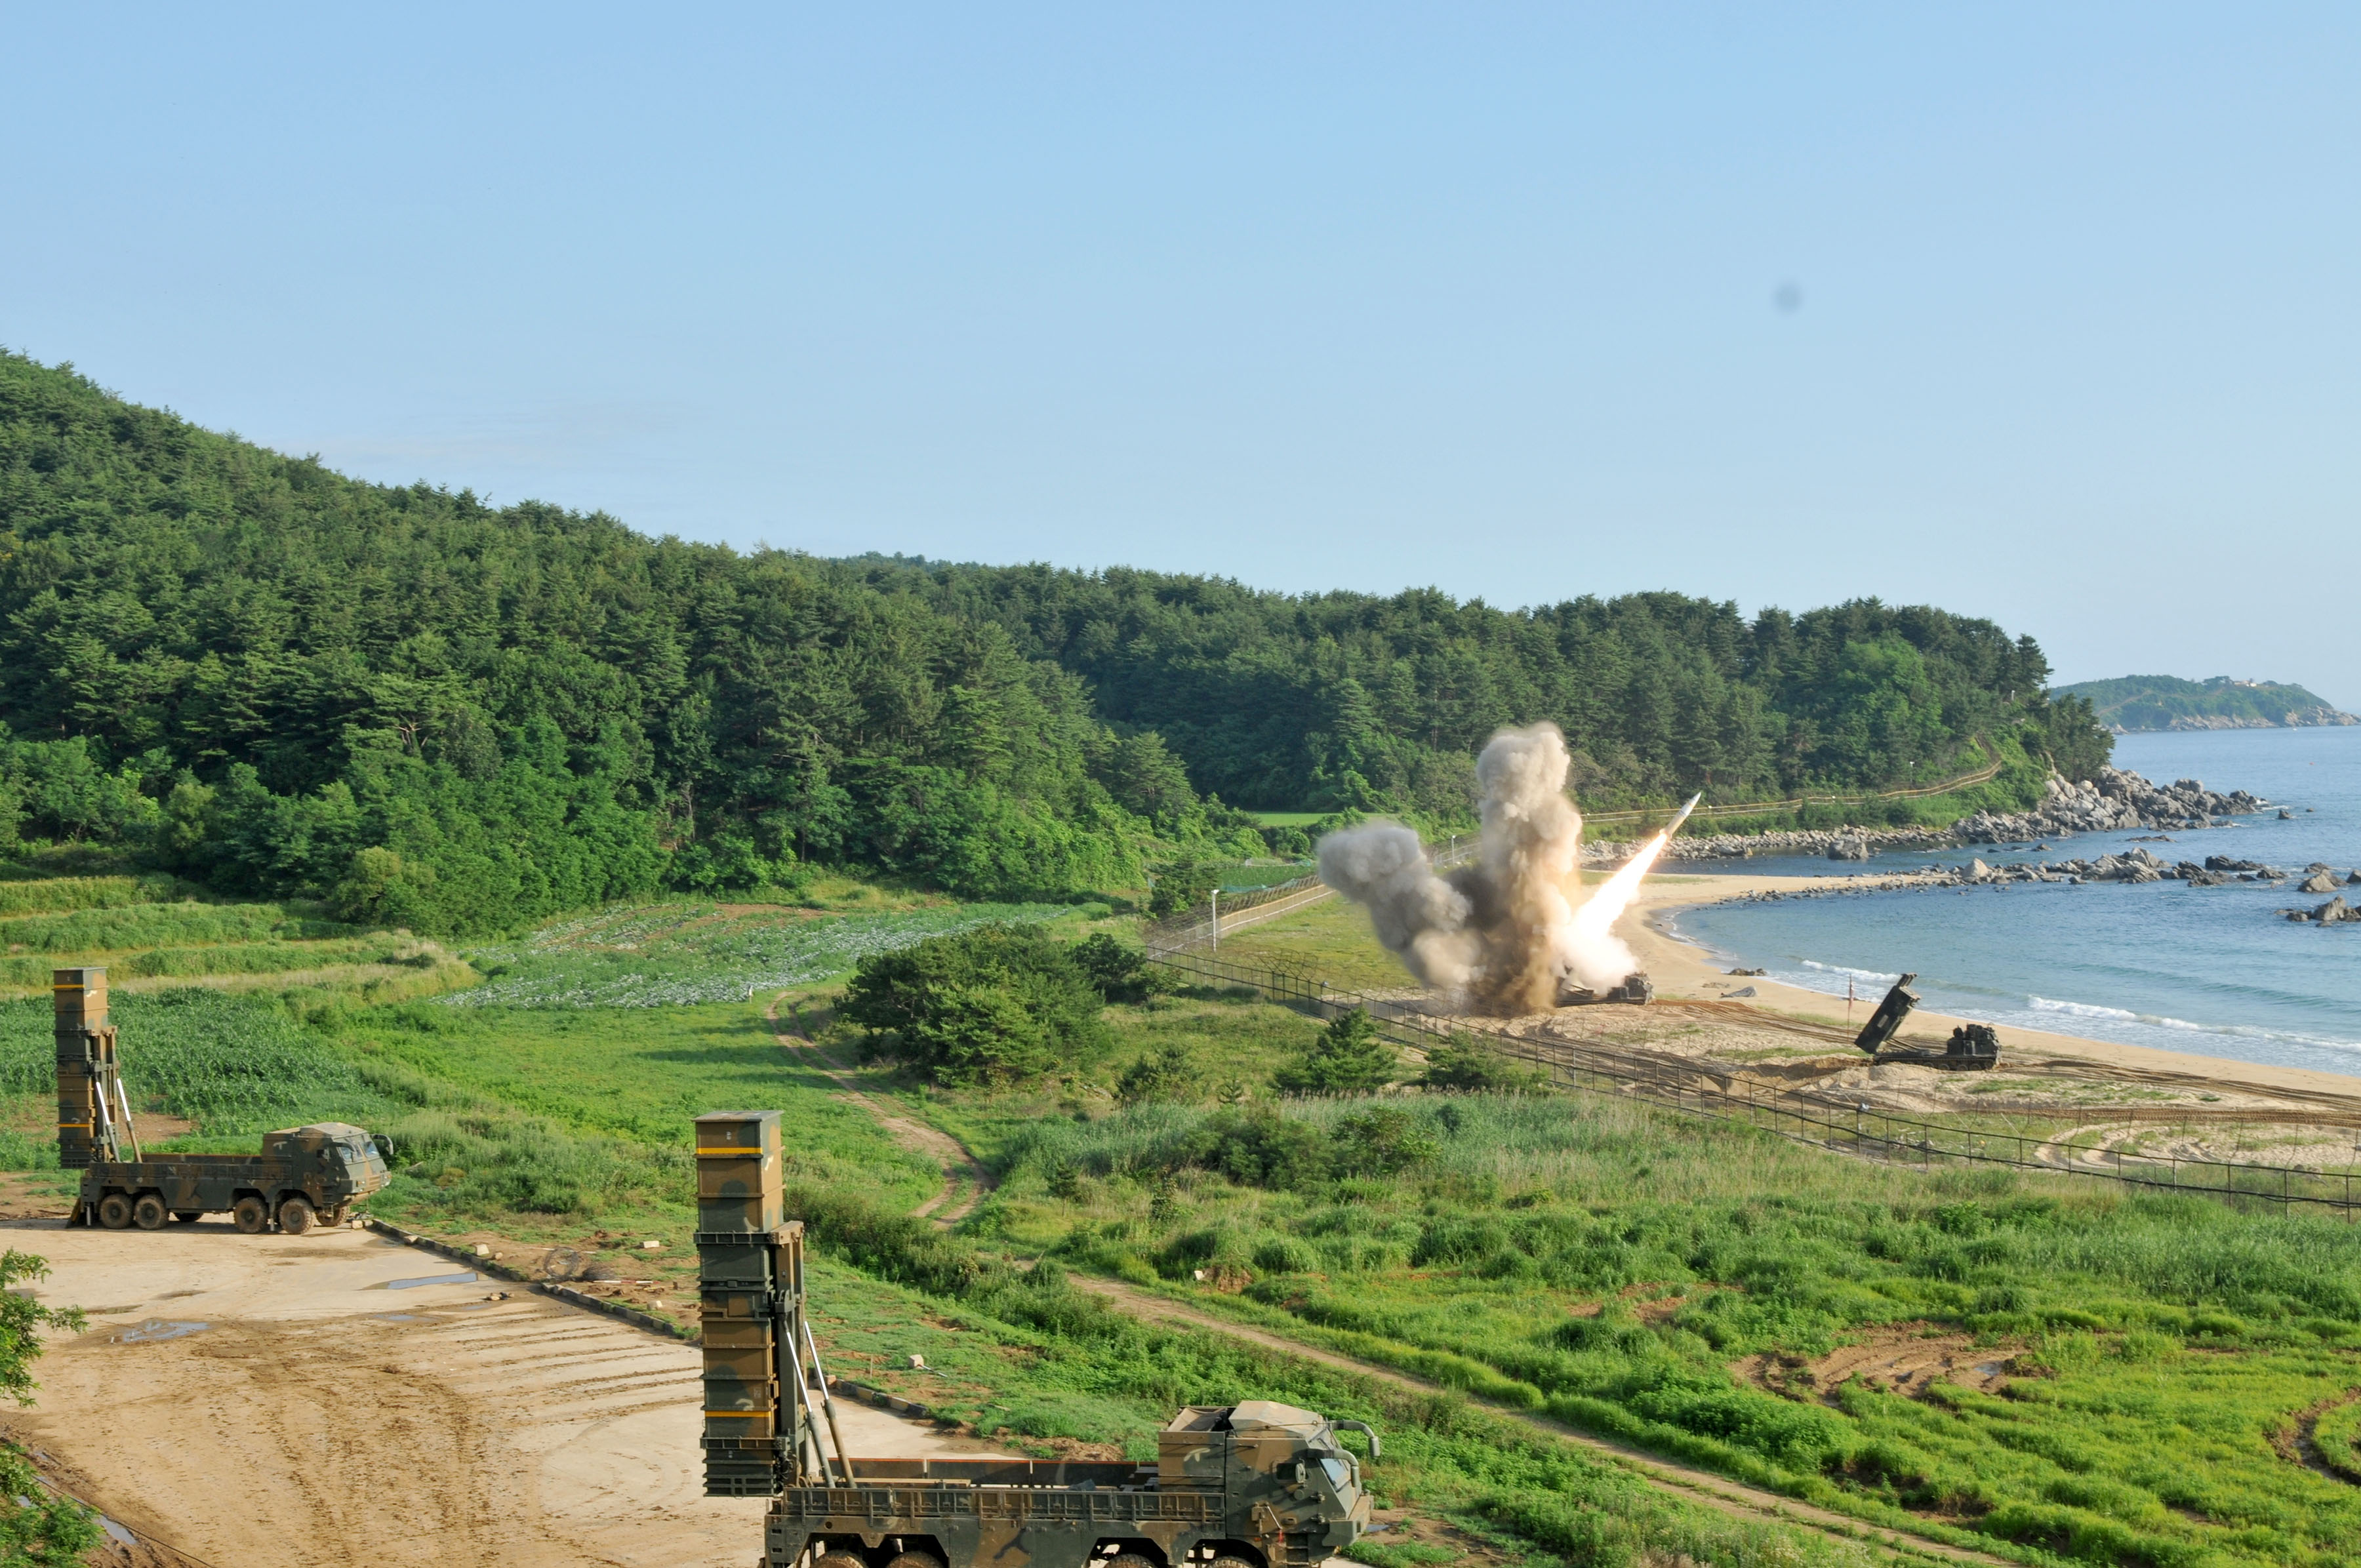 An M270 Multiple Launch Rocket System assigned to the 210th Field Artillery Brigade, 2nd Republic of Korea (ROK)/U. S. Combined Division fires an MGM-140 Army Tactical Missile into the East Sea off South Korea, July 5. The launch demonstrated the deep-strike capabilities that allow the ROK/U.S. alliance to neutralize threats in the region—an important capability given recent technological advances that U.S. adversaries have made while the U.S. has been battling nonstate foes like al-Qaida and the Taliban. (U.S. Army photo by Staff Sgt. Sinthia Rosario, 5th Mobile Public Affairs Detachment)